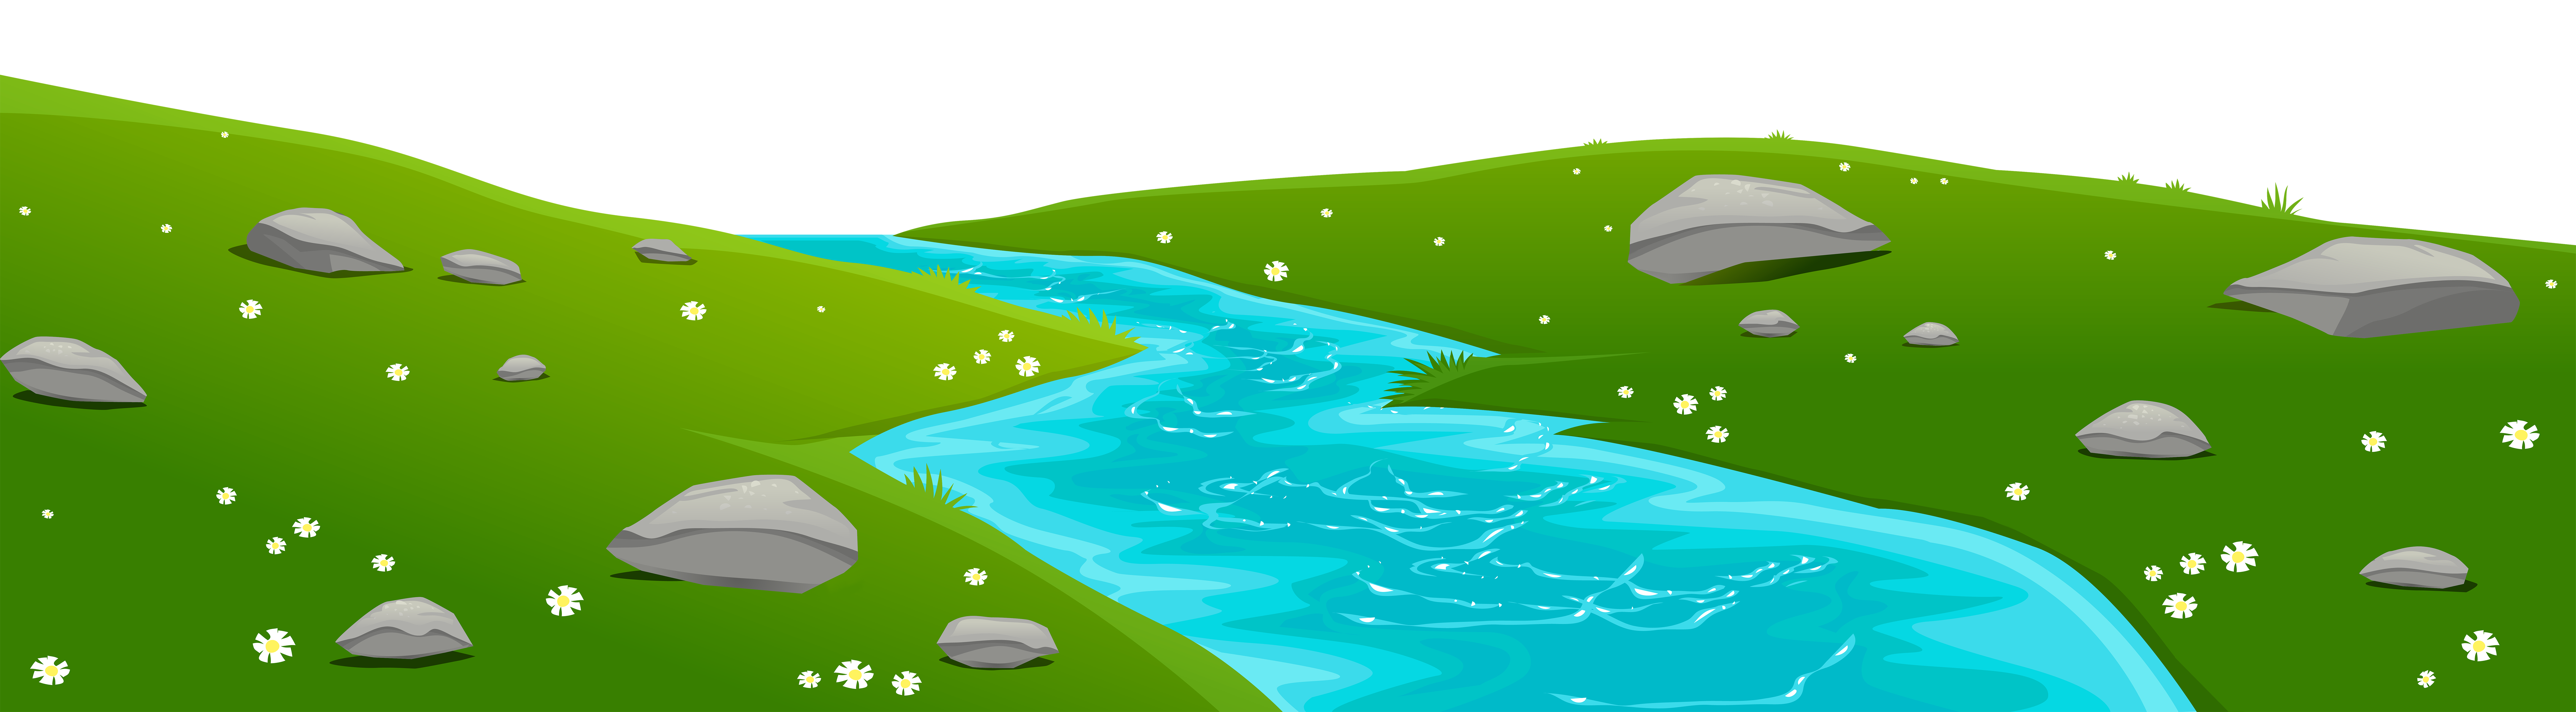 Pleasing Clipart Of A River 8